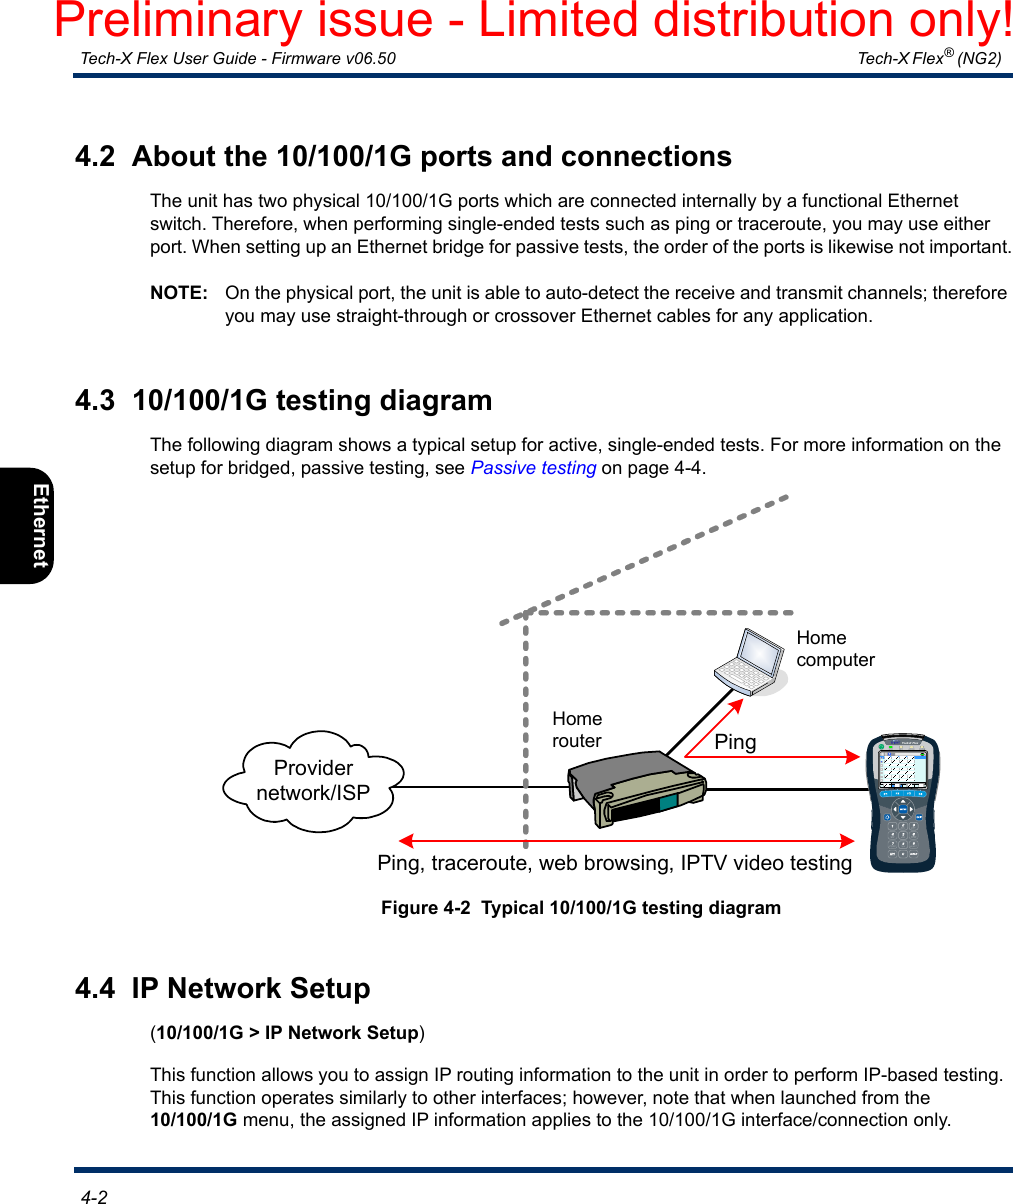  Tech-X Flex User Guide - Firmware v06.50   Tech-X Flex® (NG2)  4-2Intro Overview Wi-Fi Ethernet System IP/Video MoCA RF Specs4.2  About the 10/100/1G ports and connectionsThe unit has two physical 10/100/1G ports which are connected internally by a functional Ethernet switch. Therefore, when performing single-ended tests such as ping or traceroute, you may use either port. When setting up an Ethernet bridge for passive tests, the order of the ports is likewise not important.NOTE: On the physical port, the unit is able to auto-detect the receive and transmit channels; therefore you may use straight-through or crossover Ethernet cables for any application.4.3  10/100/1G testing diagramThe following diagram shows a typical setup for active, single-ended tests. For more information on the setup for bridged, passive testing, see Passive testing on page 4-4.Figure 4-2  Typical 10/100/1G testing diagram4.4  IP Network Setup(10/100/1G &gt; IP Network Setup)This function allows you to assign IP routing information to the unit in order to perform IP-based testing. This function operates similarly to other interfaces; however, note that when launched from the 10/100/1G menu, the assigned IP information applies to the 10/100/1G interface/connection only.Ping, traceroute, web browsing, IPTV video testingProvider network/ISPHome routerHome computerPingPreliminary issue - Limited distribution only!